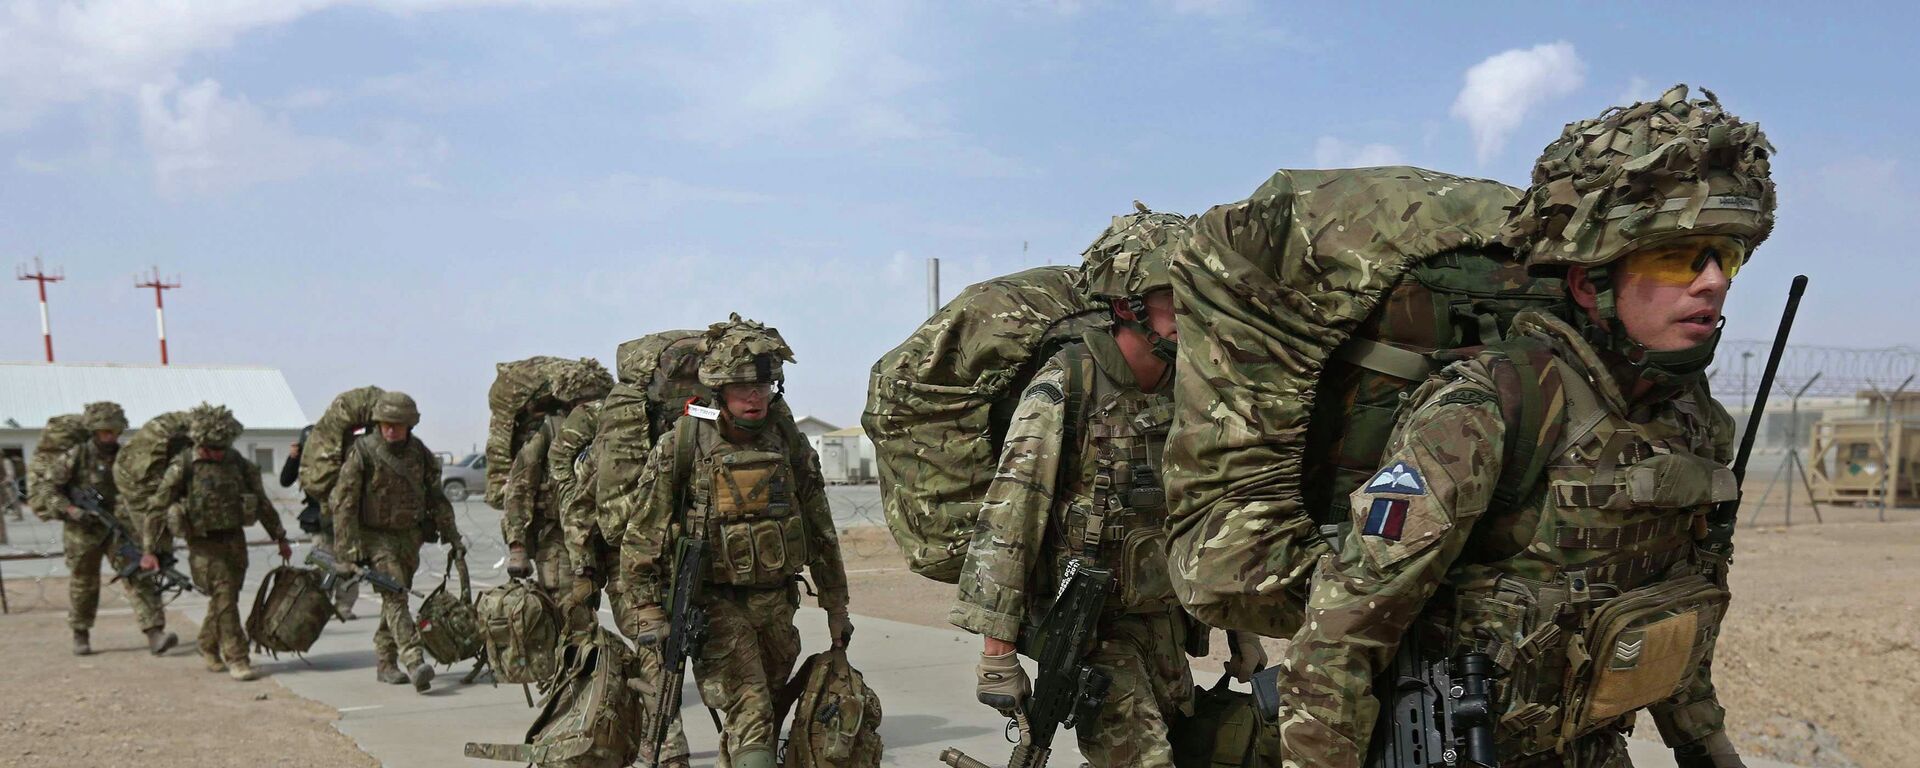 British troops prepare to depart upon the end of operations for U.S. Marines and British combat troops in Helmand - اسپوتنیک افغانستان  , 1920, 06.06.2016